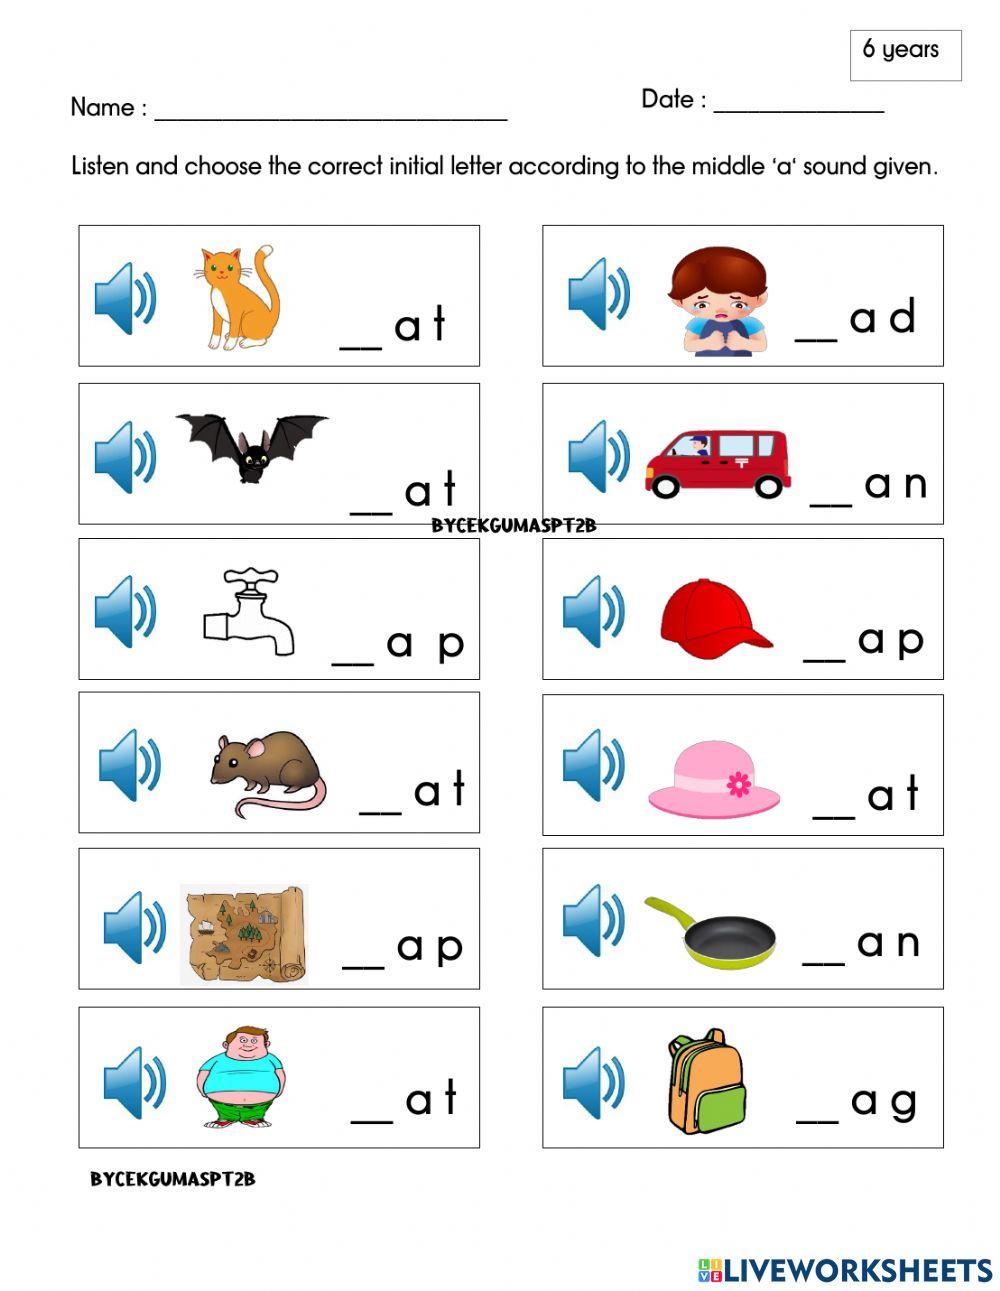 Write the correct initial letter according to the audio given